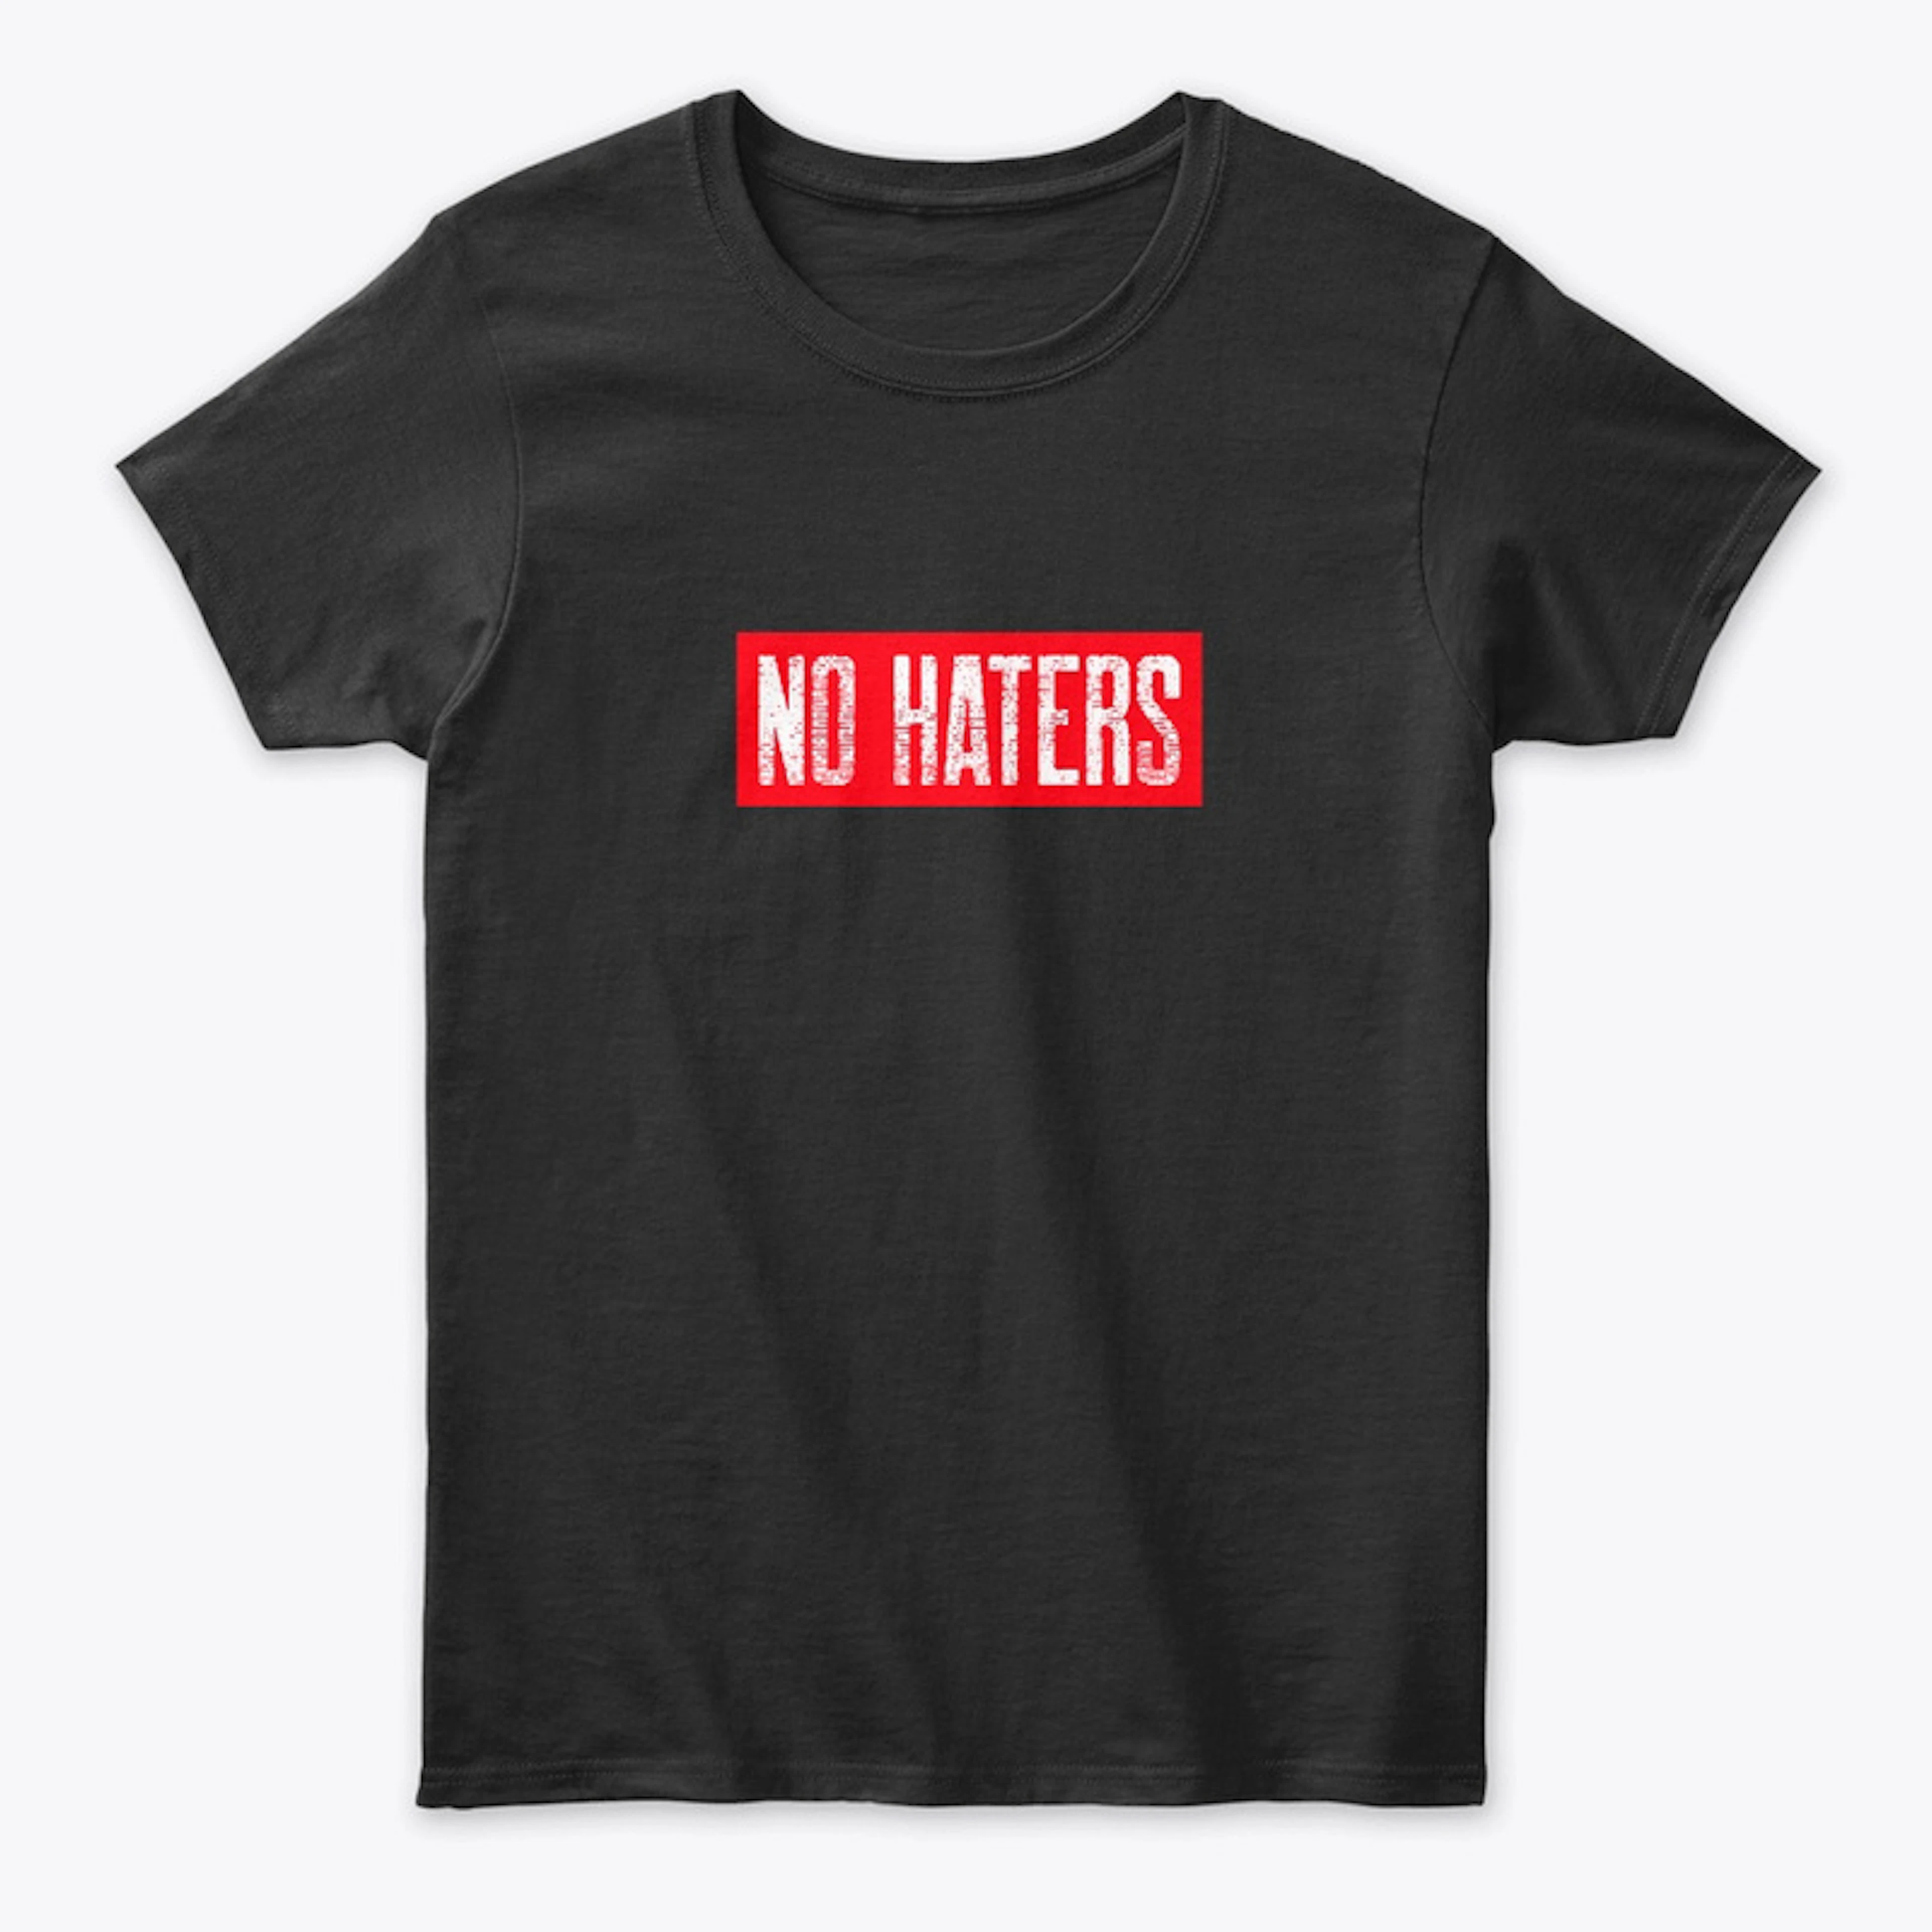 No Haters Brand